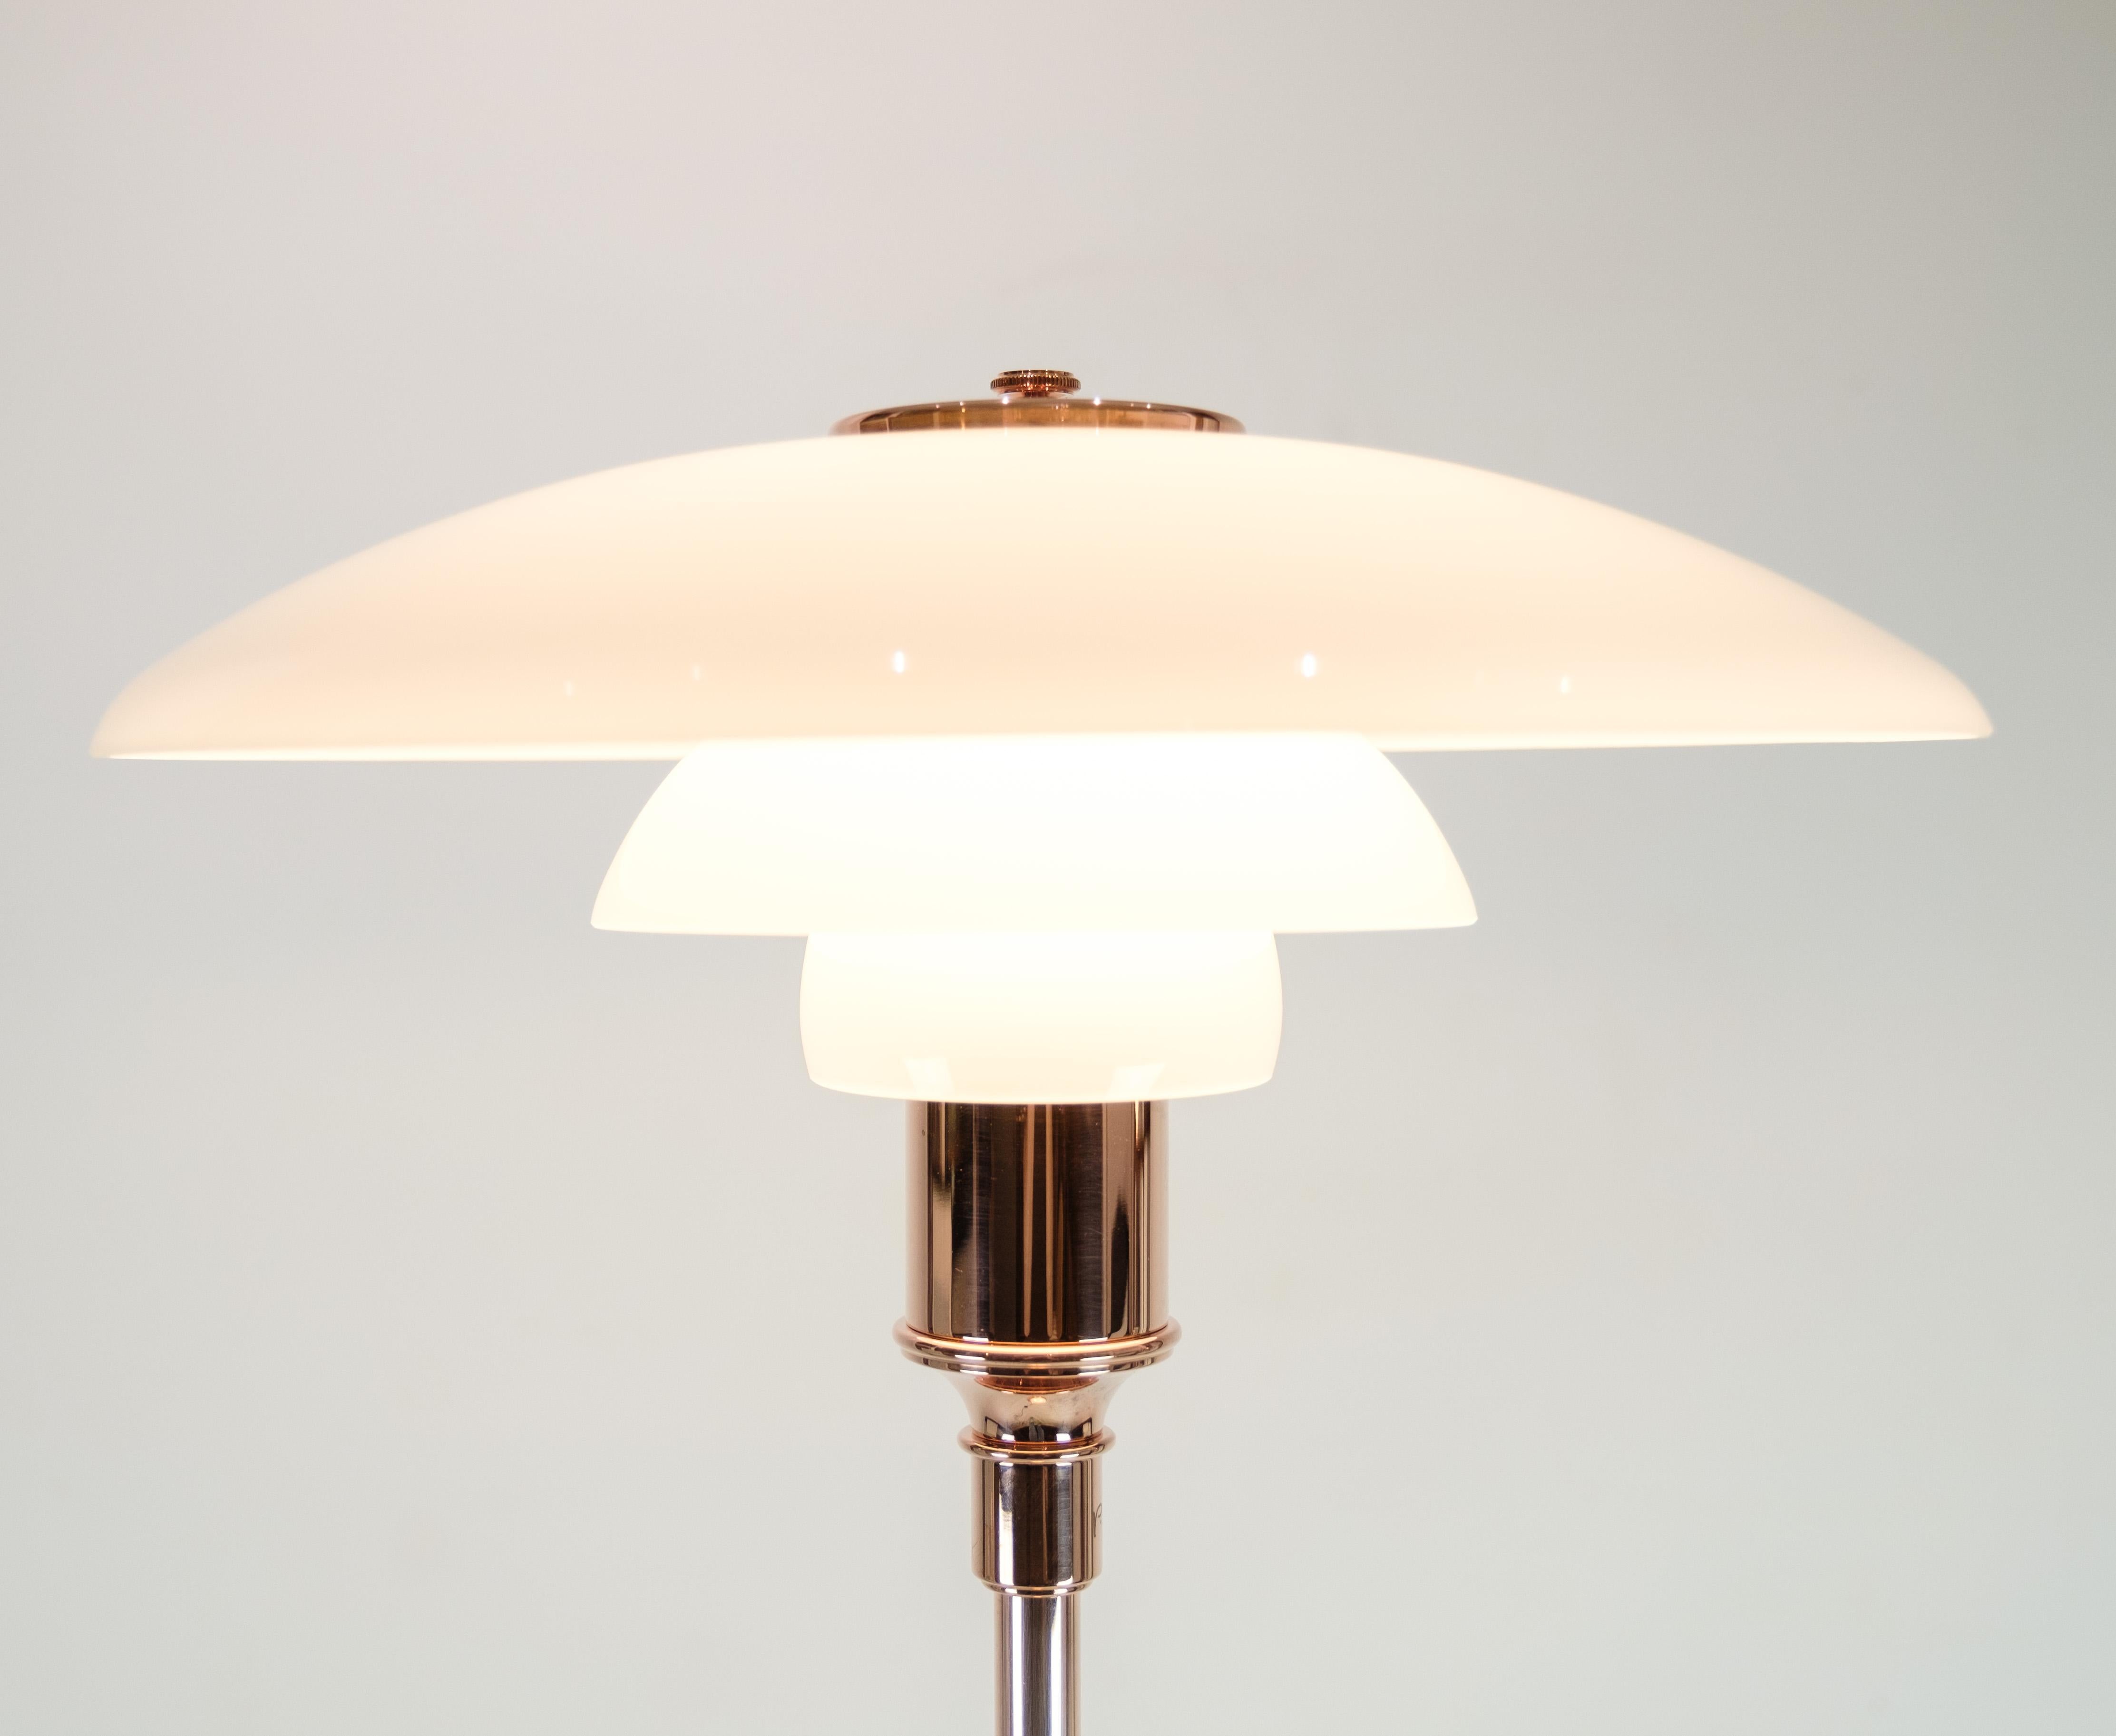 PH floor lamp, model PH3½-2½, limited edition in copper designed by Poul Henningsen and produced by Louis Poulsen. The lamp has three shade of shades in white opal glass. The lamp was only sold between 1 October and 31 December 2016. It cannot be